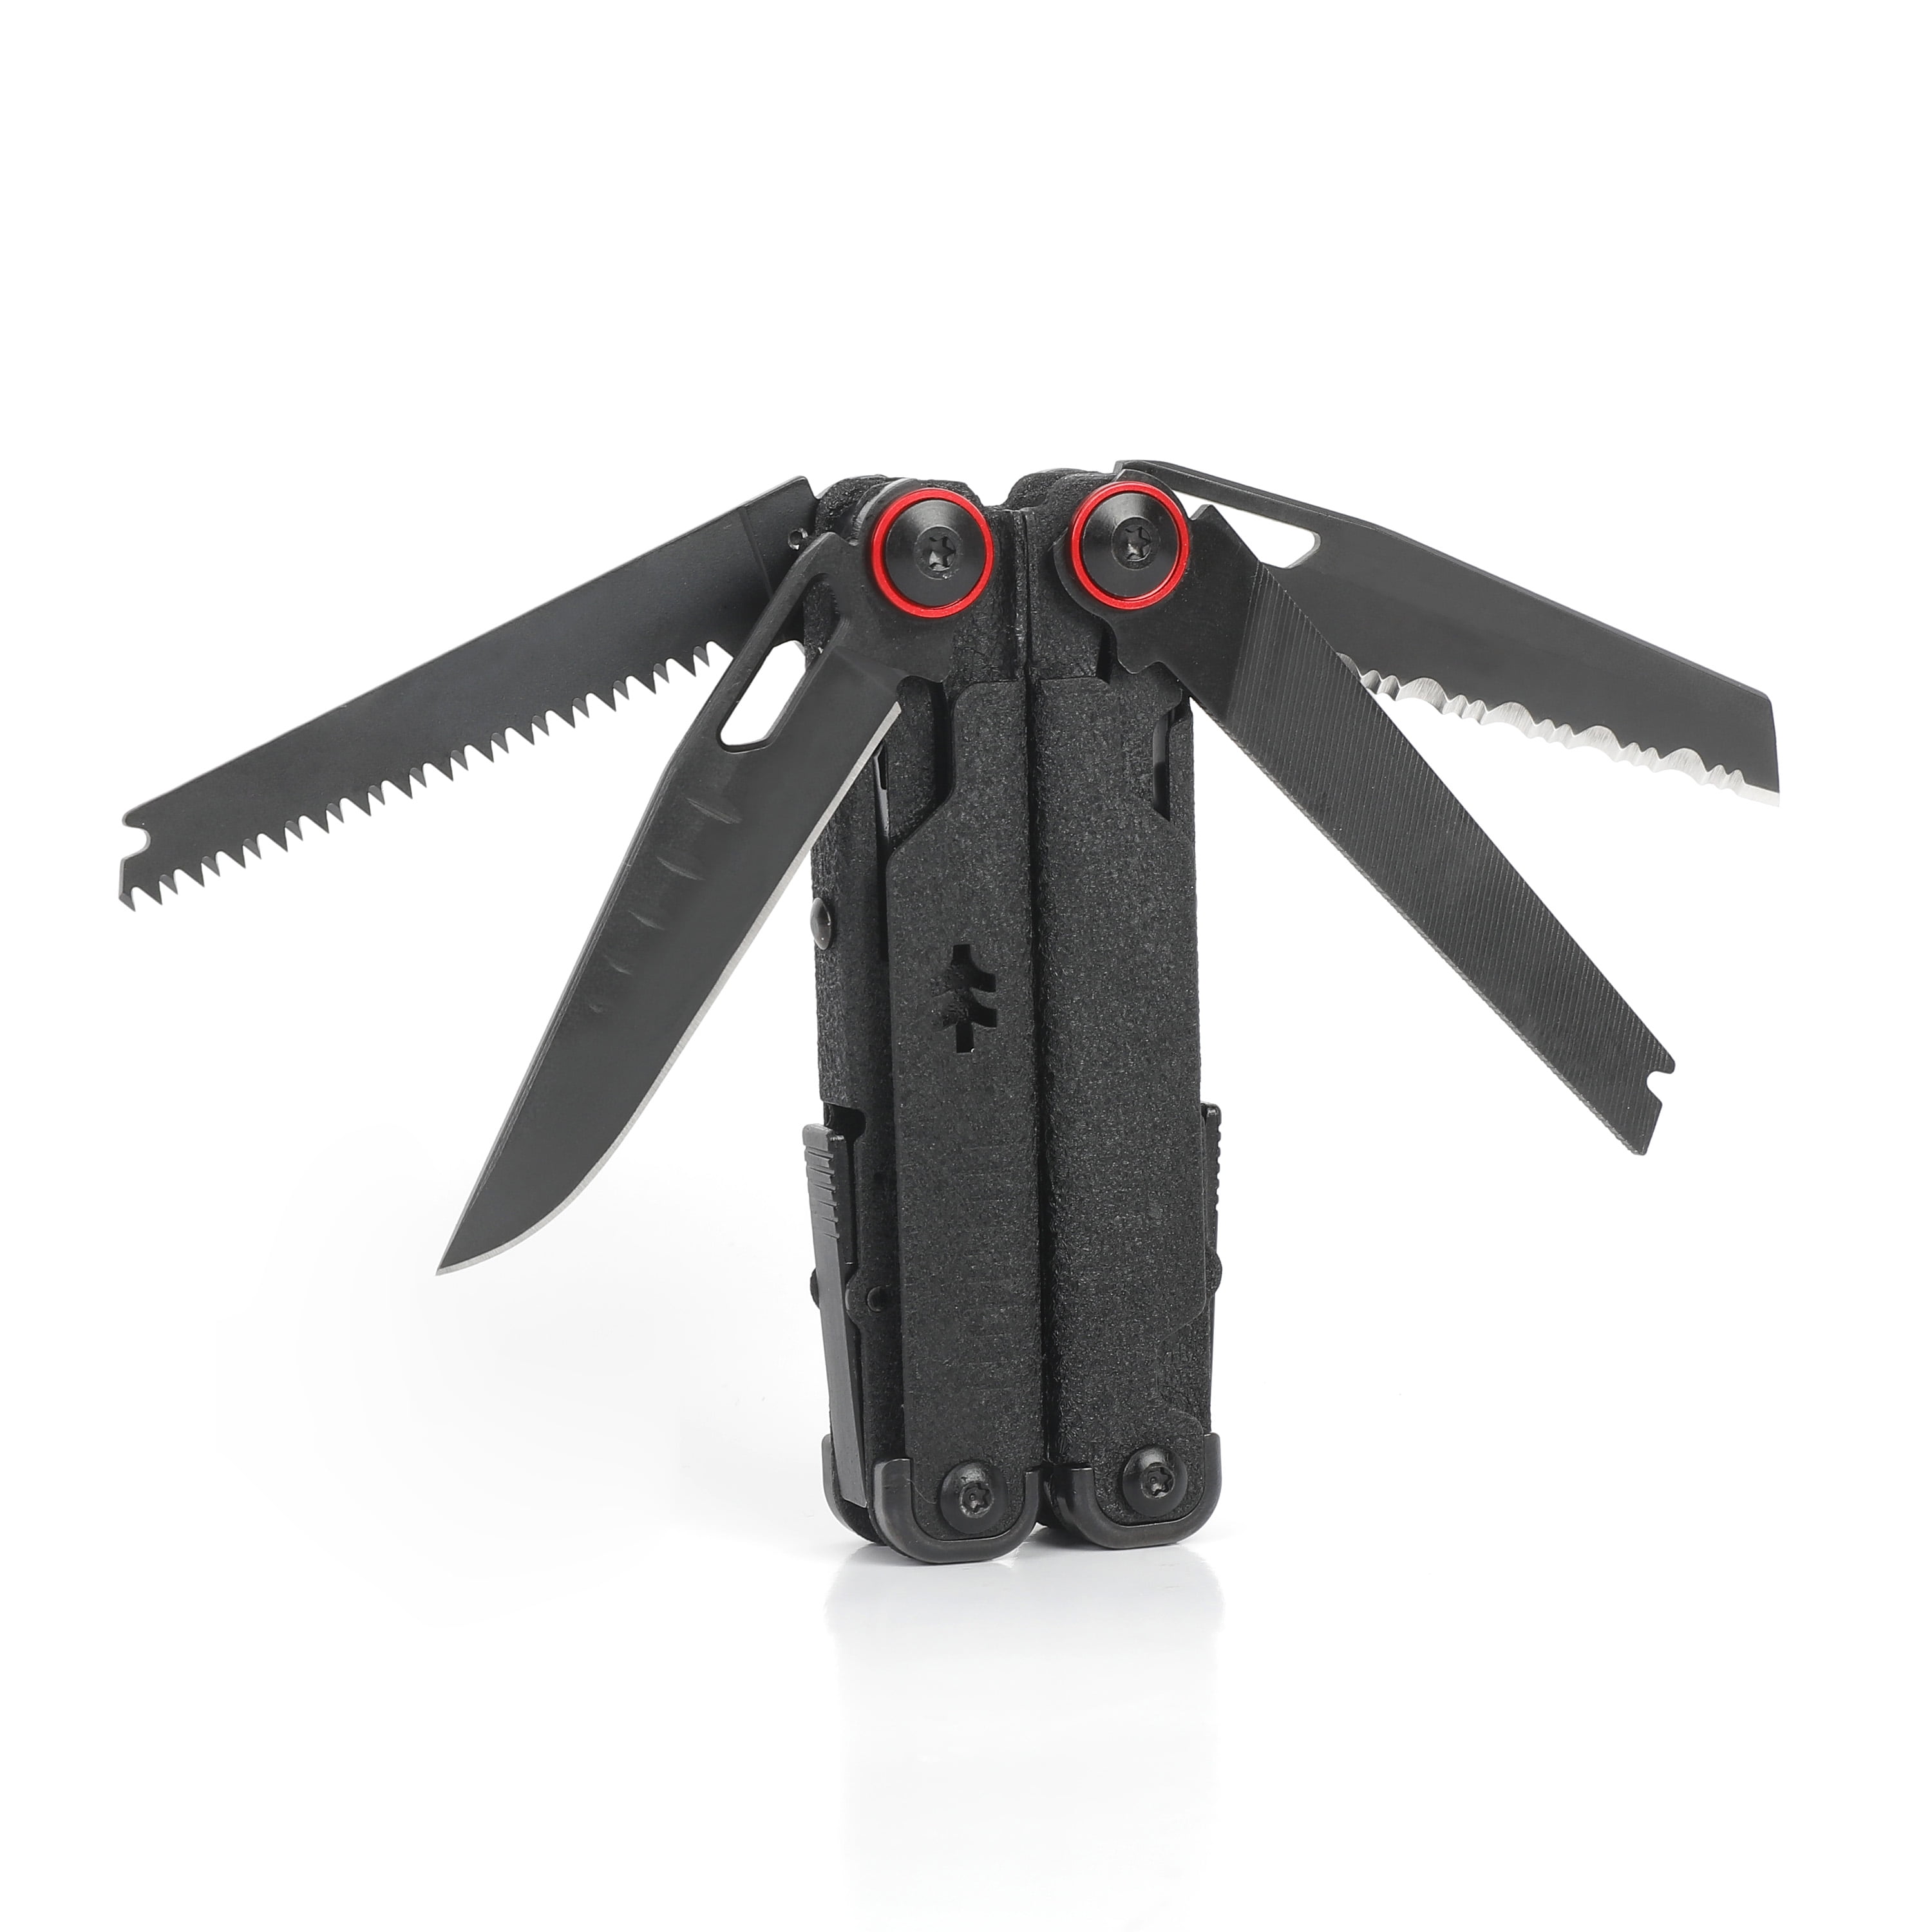 SWISS+TECH ST41150 Folding Multi-Tool with Screwdrivers and Wrenches,  Stainless Steel (Single Pack)